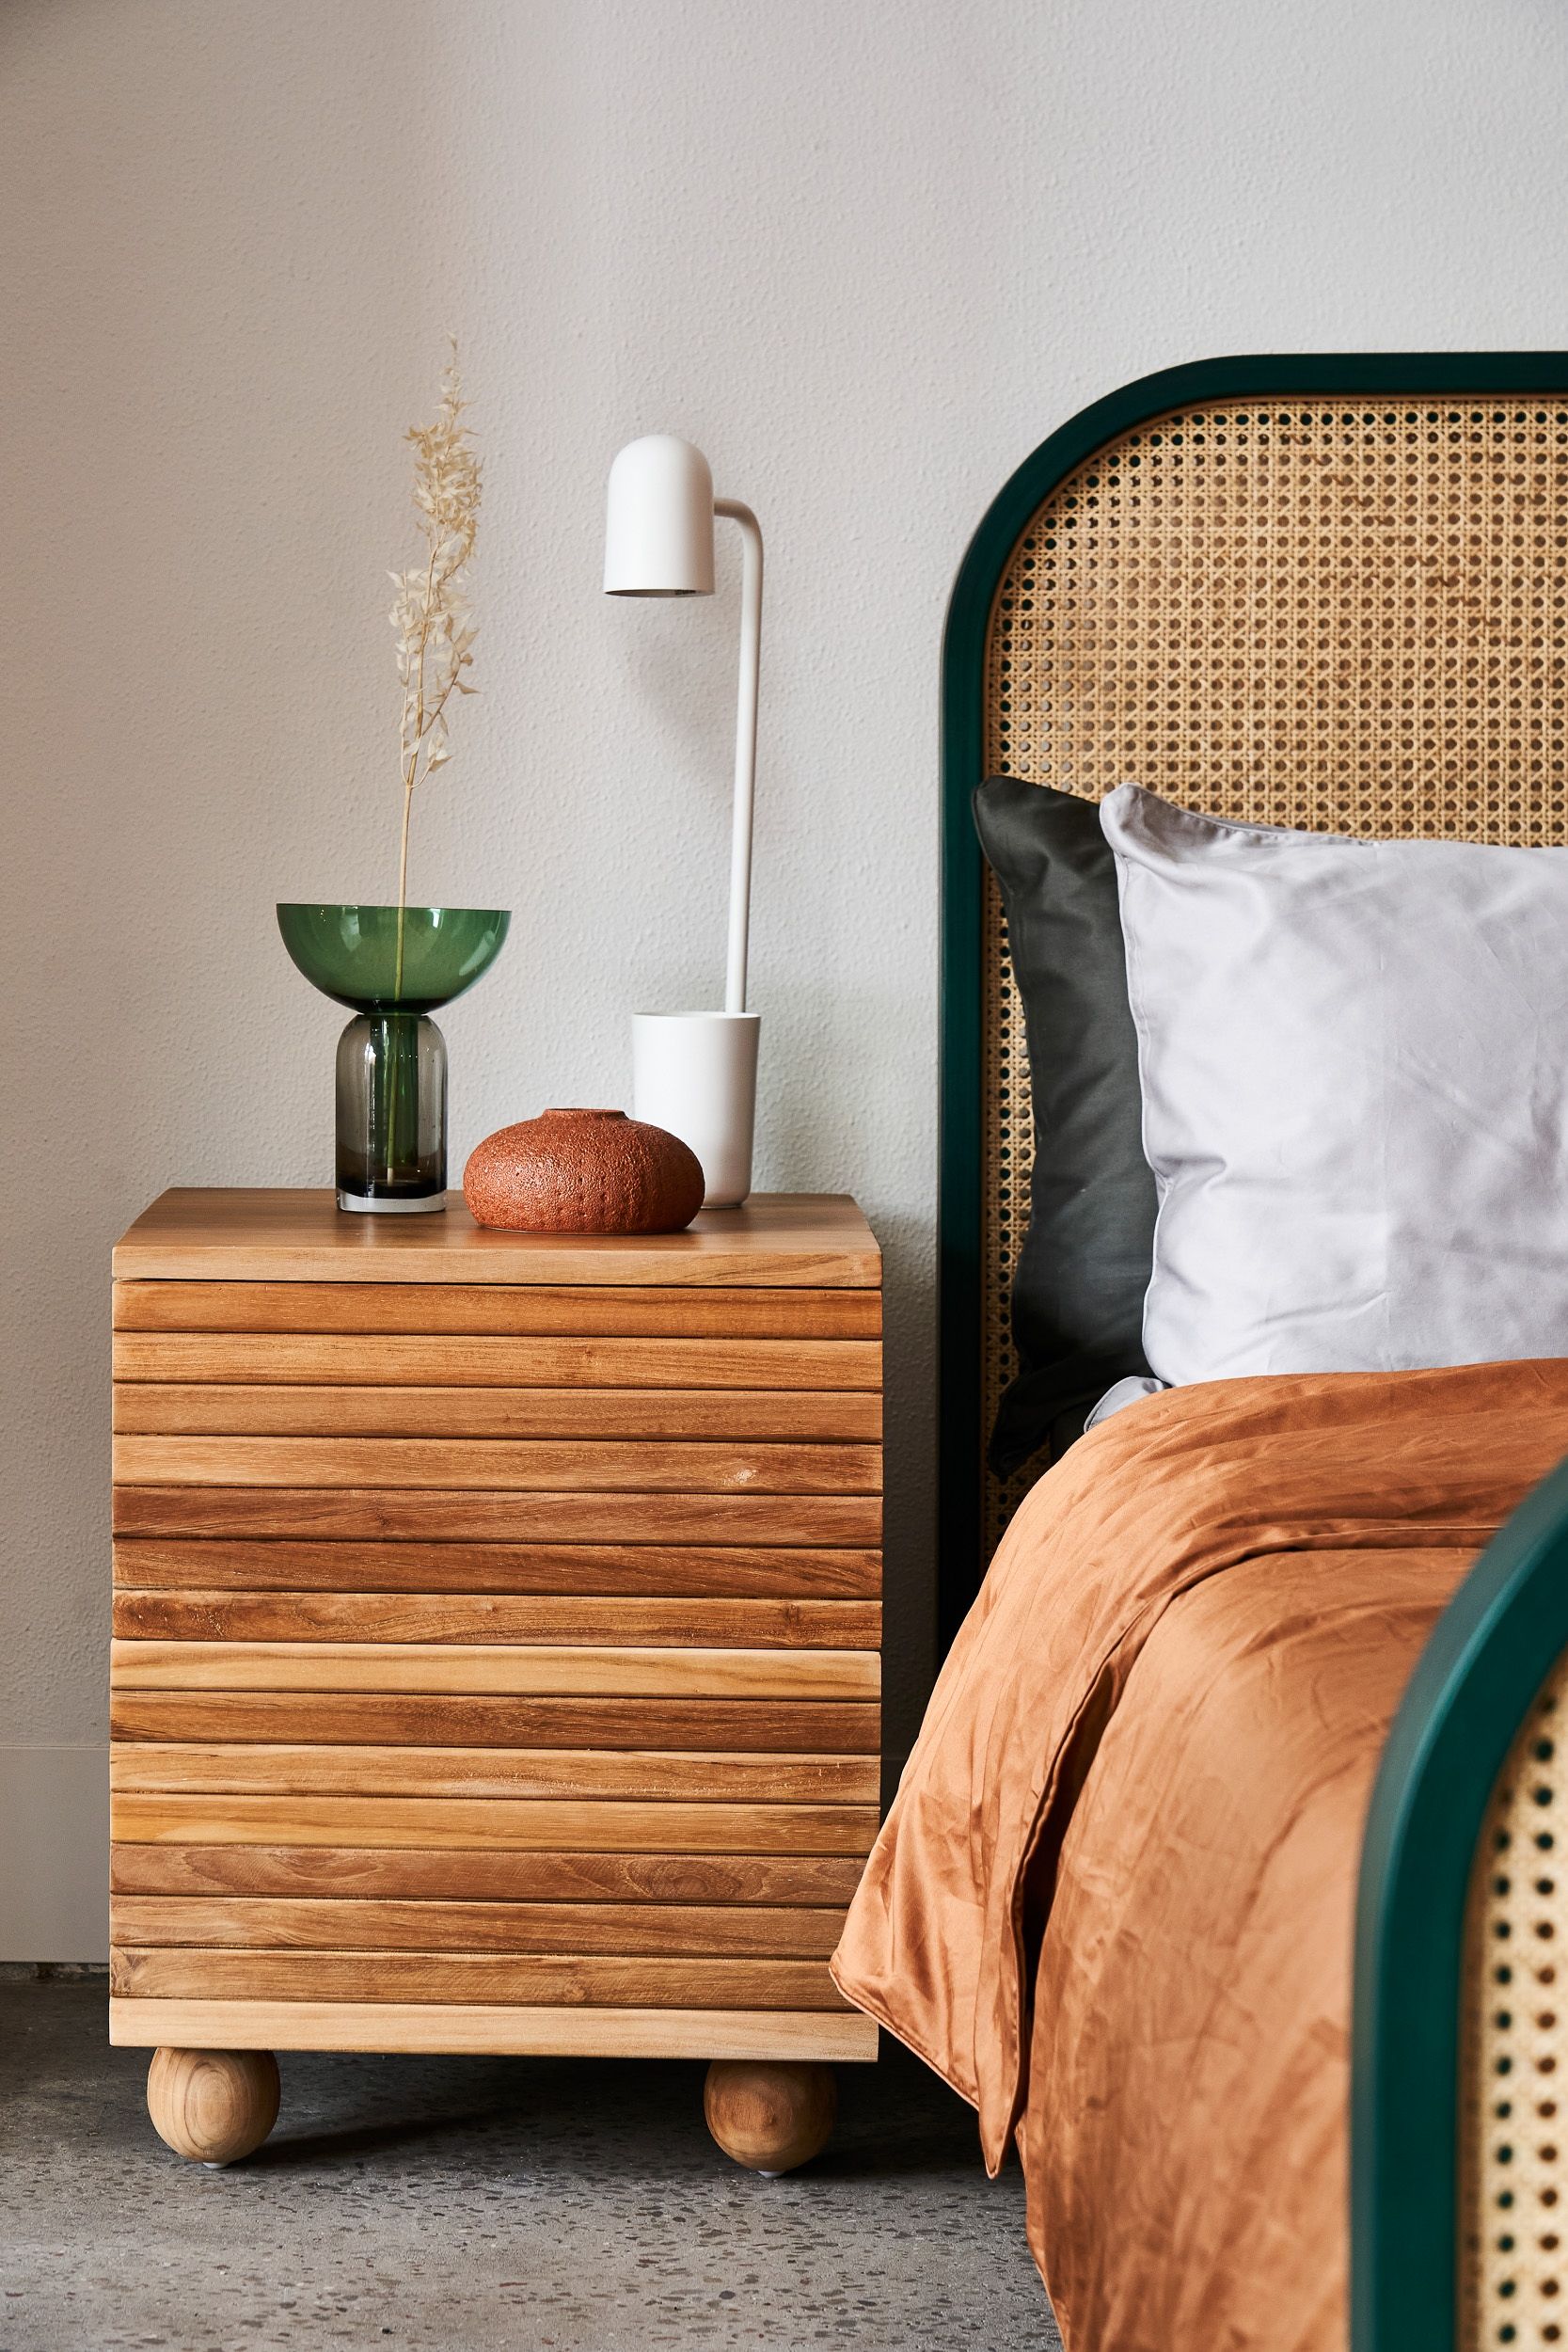 Using Timber Planks for A Classic Bedside Table